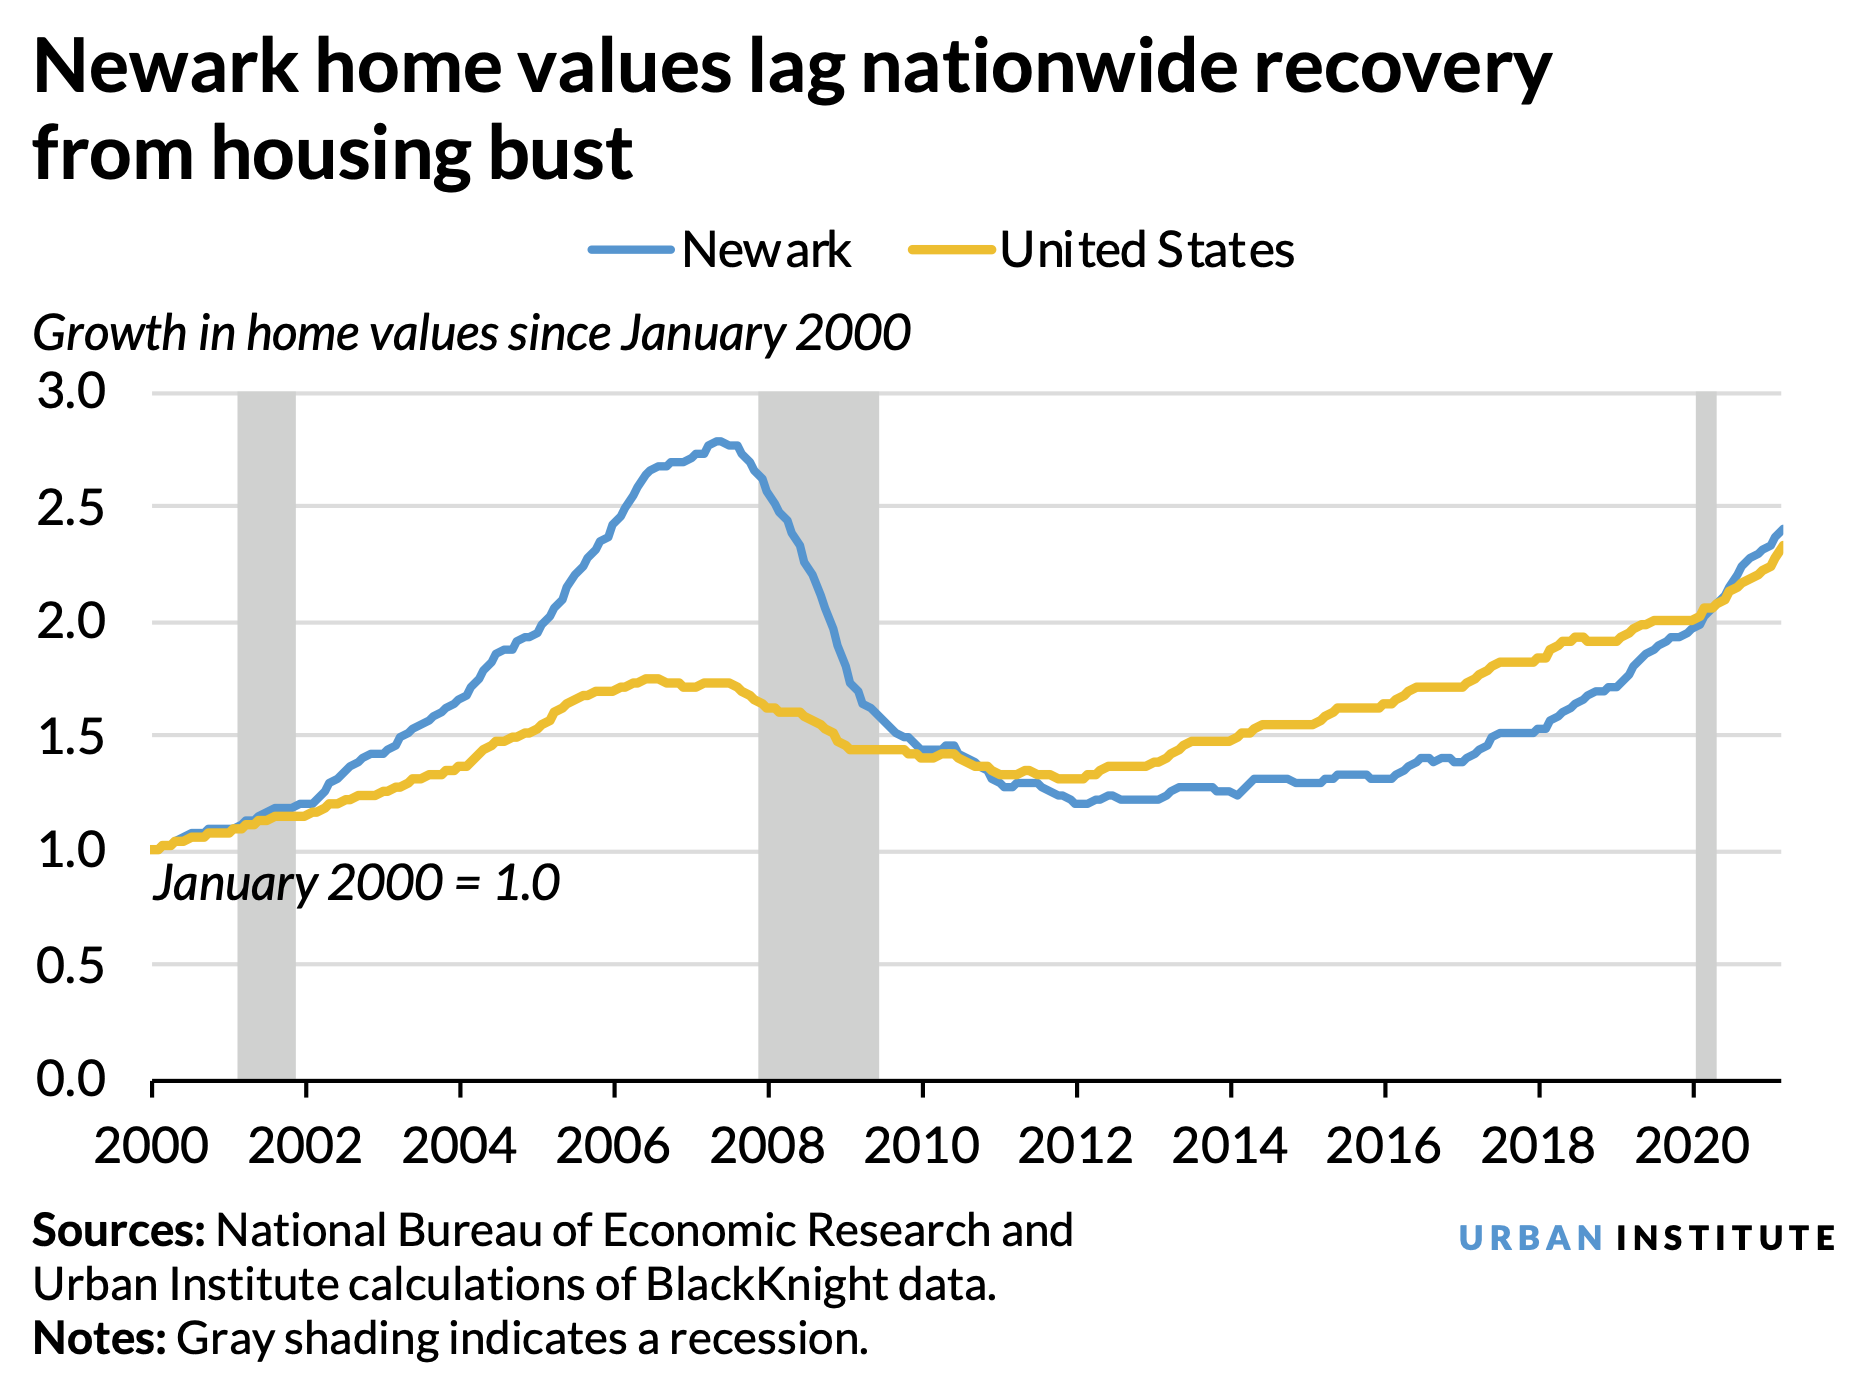 A line chart showing that home values in Newark lagged behind the nationwide rate following the 2009 Great Recession.